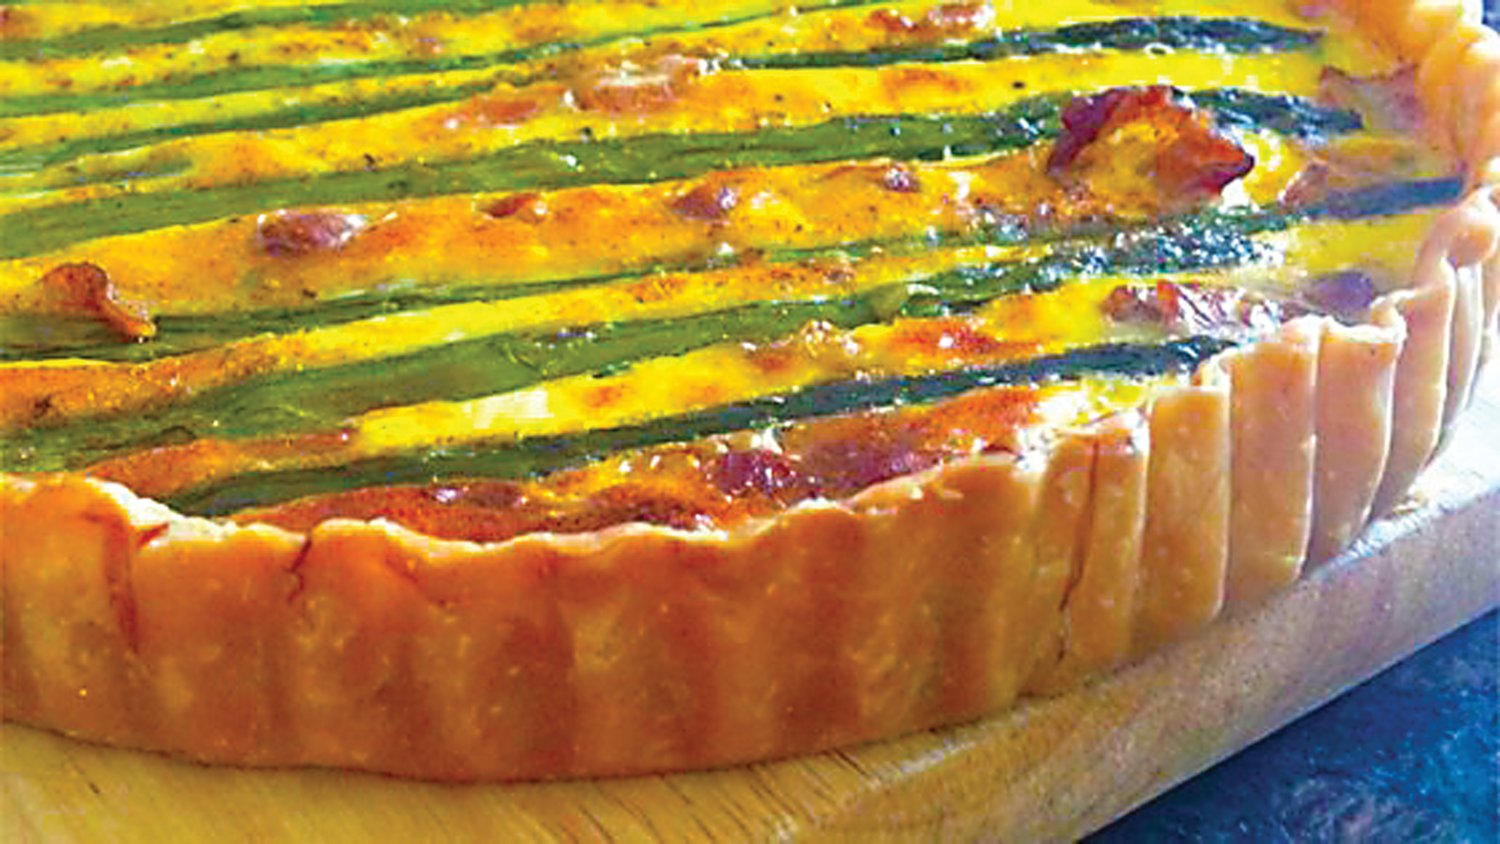 Asparagus and eggs are favorites at Easter and they come together in this simple quiche that would work for any brunch or buffet. Photograph from allrecipes.com.